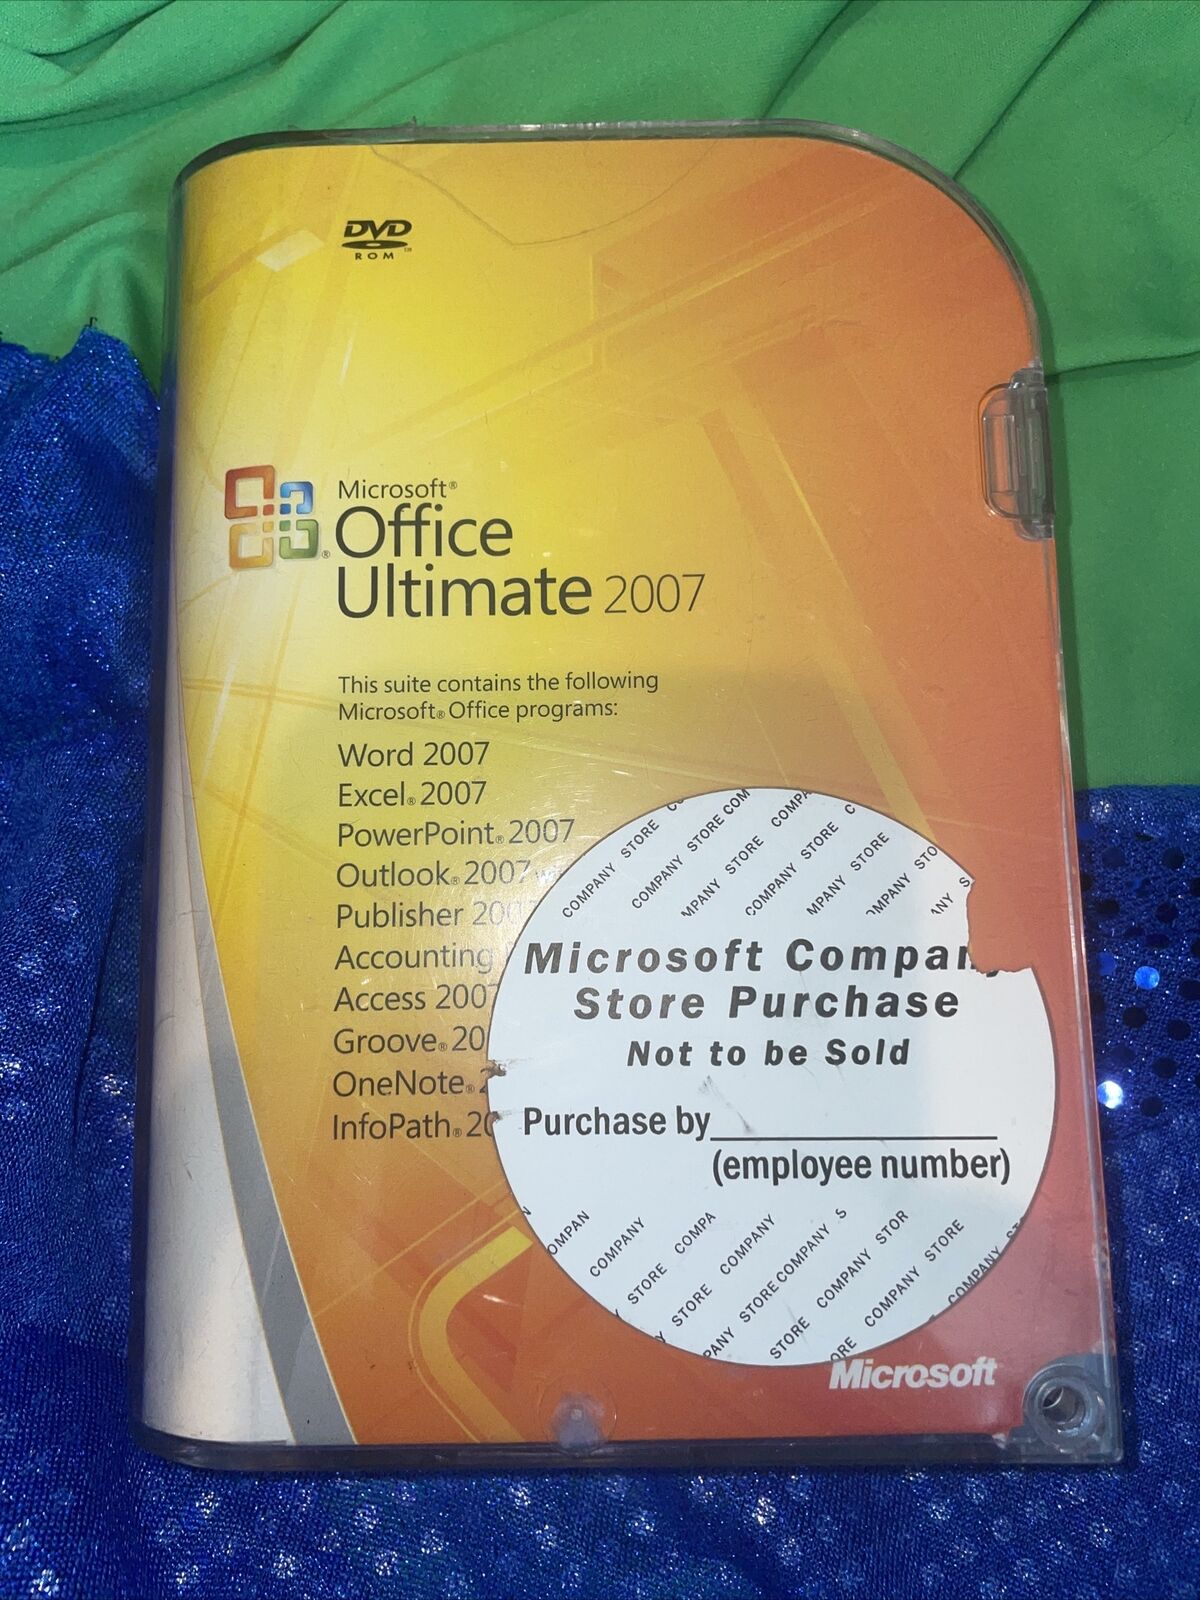 MS Microsoft Office 2007 Ultimate Full English Retail Version DVD complete